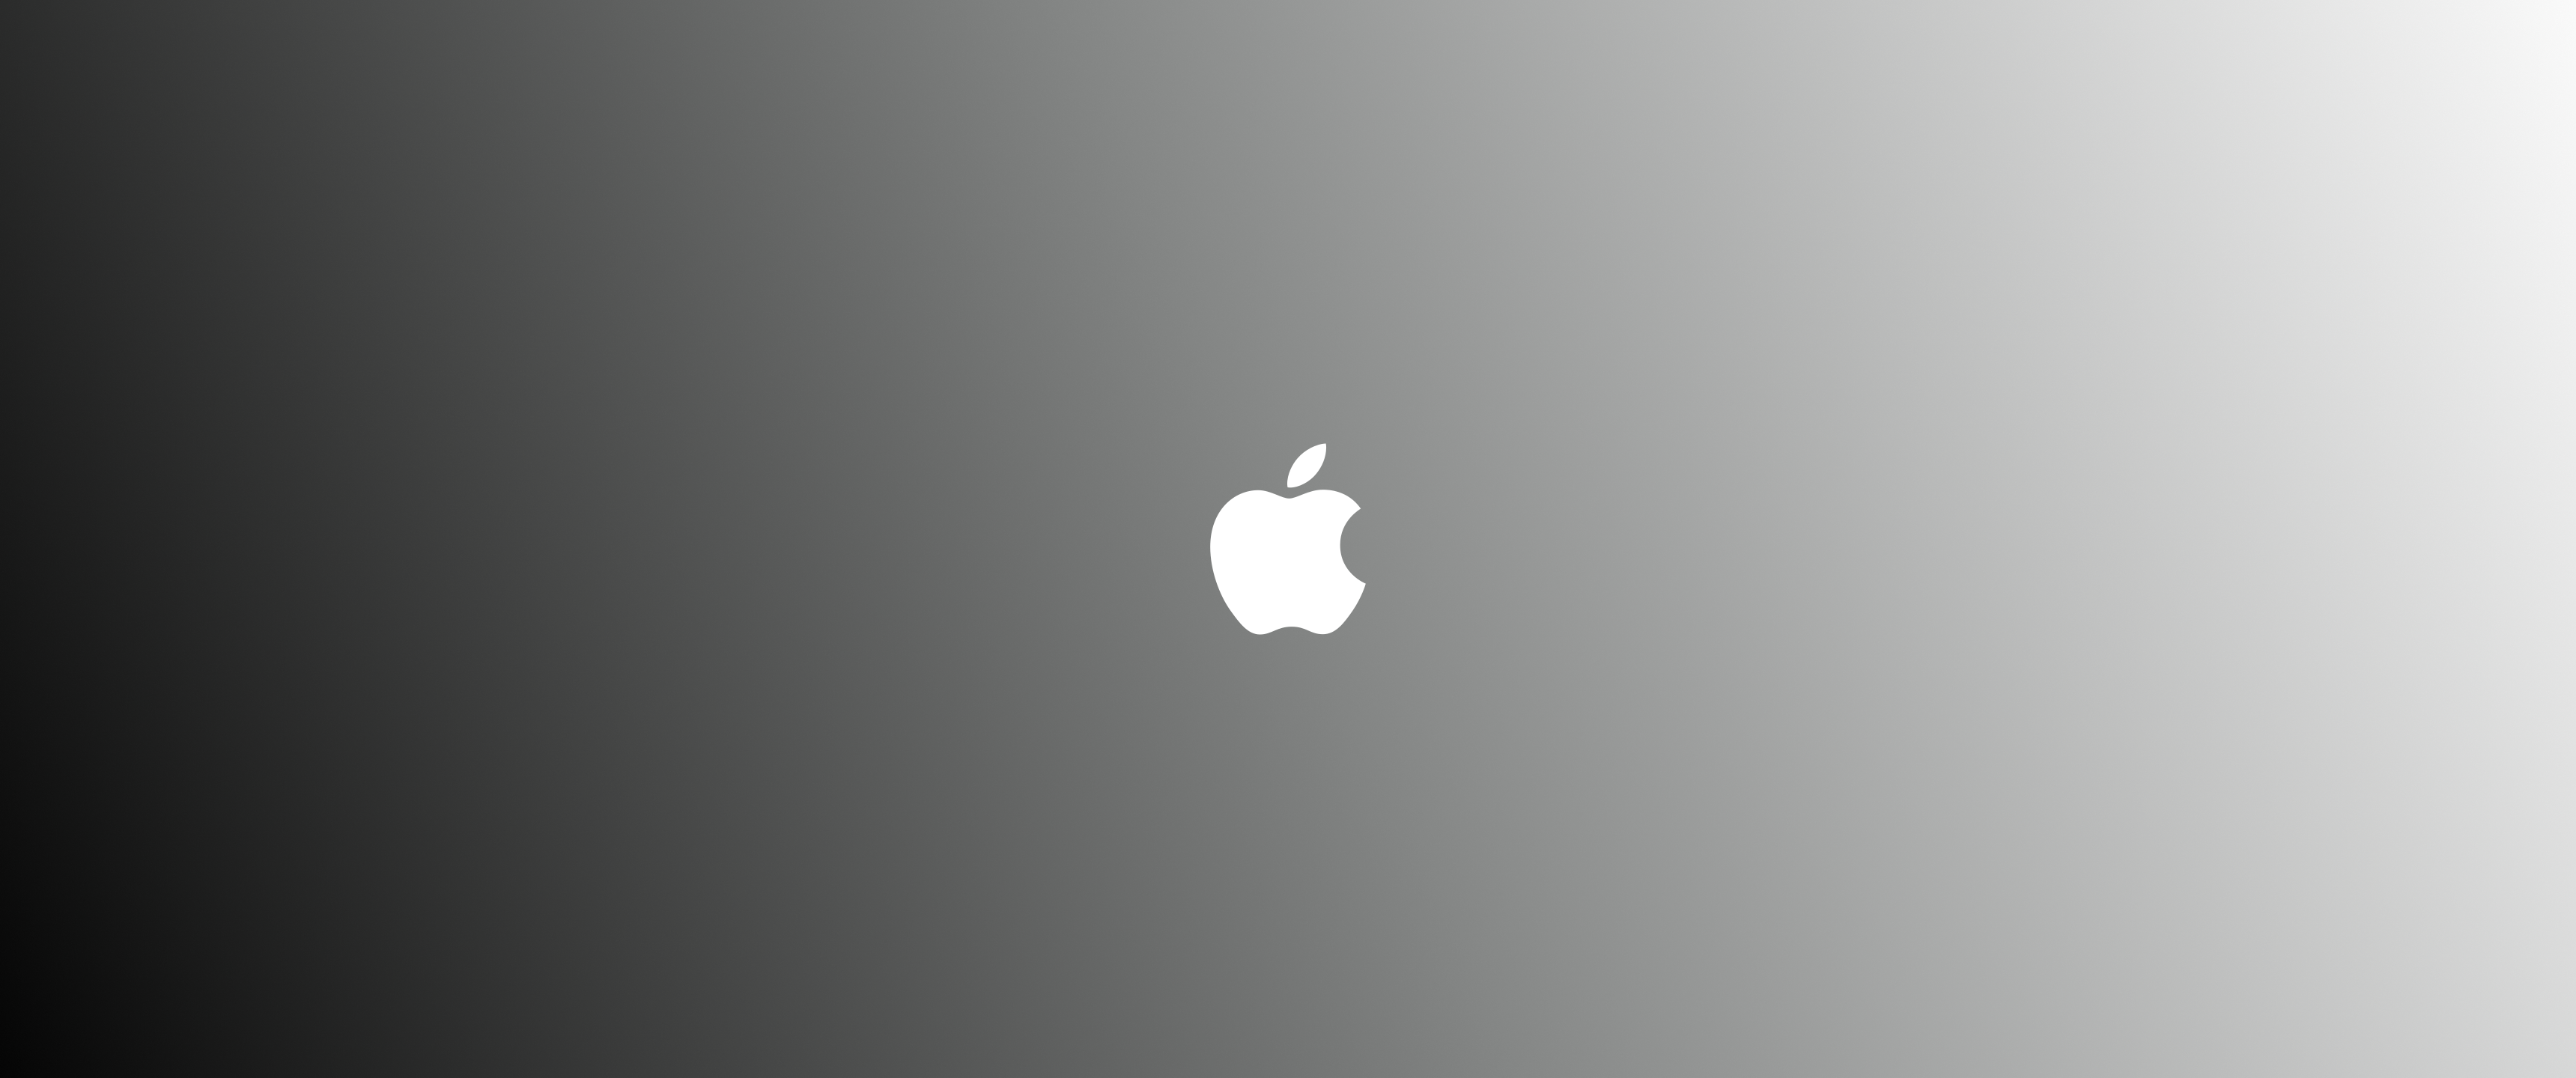 General 3440x1440 gradient minimalism operating system macOS simple background logo